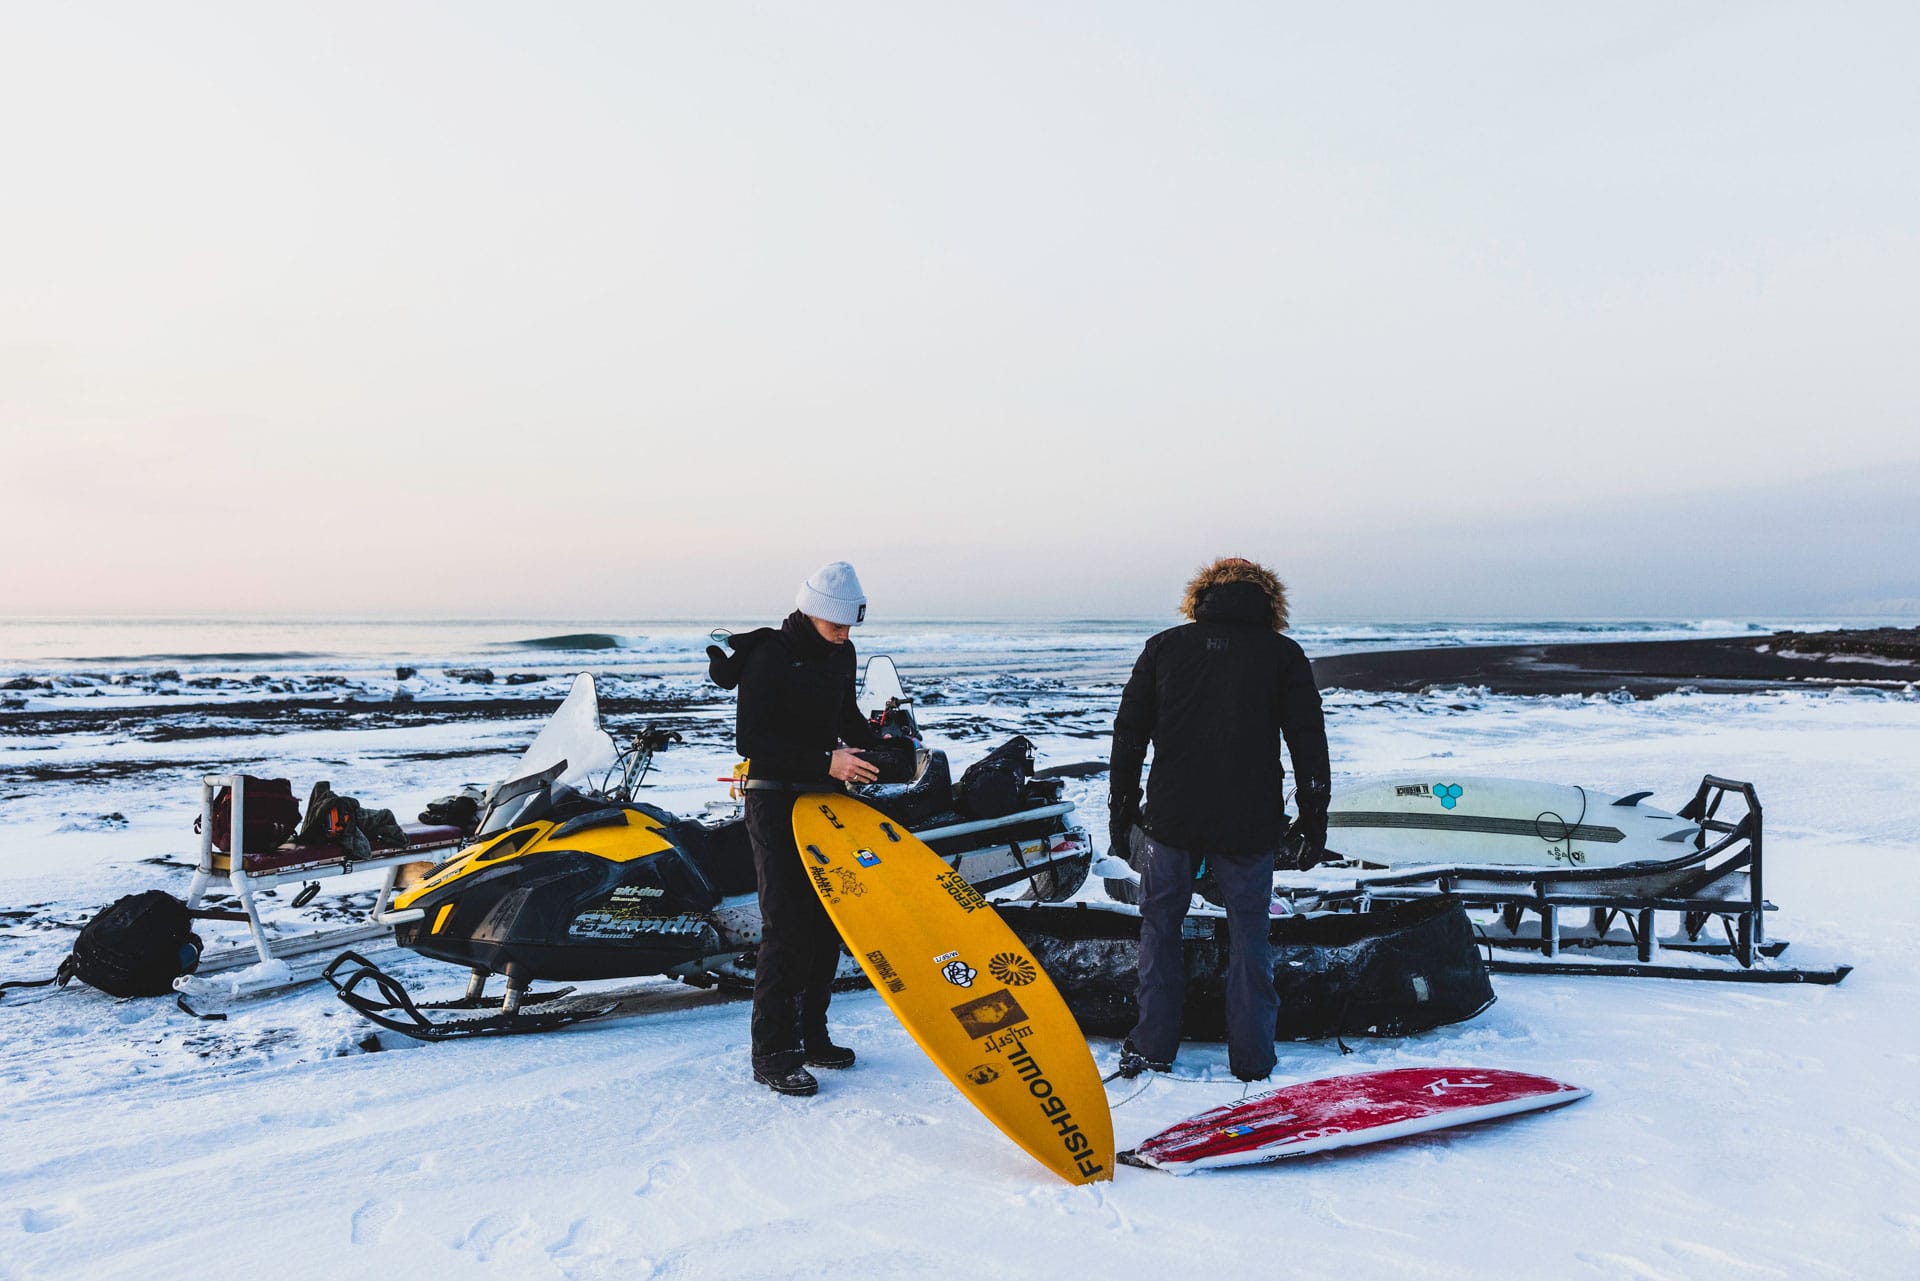 Meet the Aussie Surfers Who Travelled to Russia's Kamchatka Peninsula in Search of Unridden Waves, Tim Ashelford, snow, surfboards, people